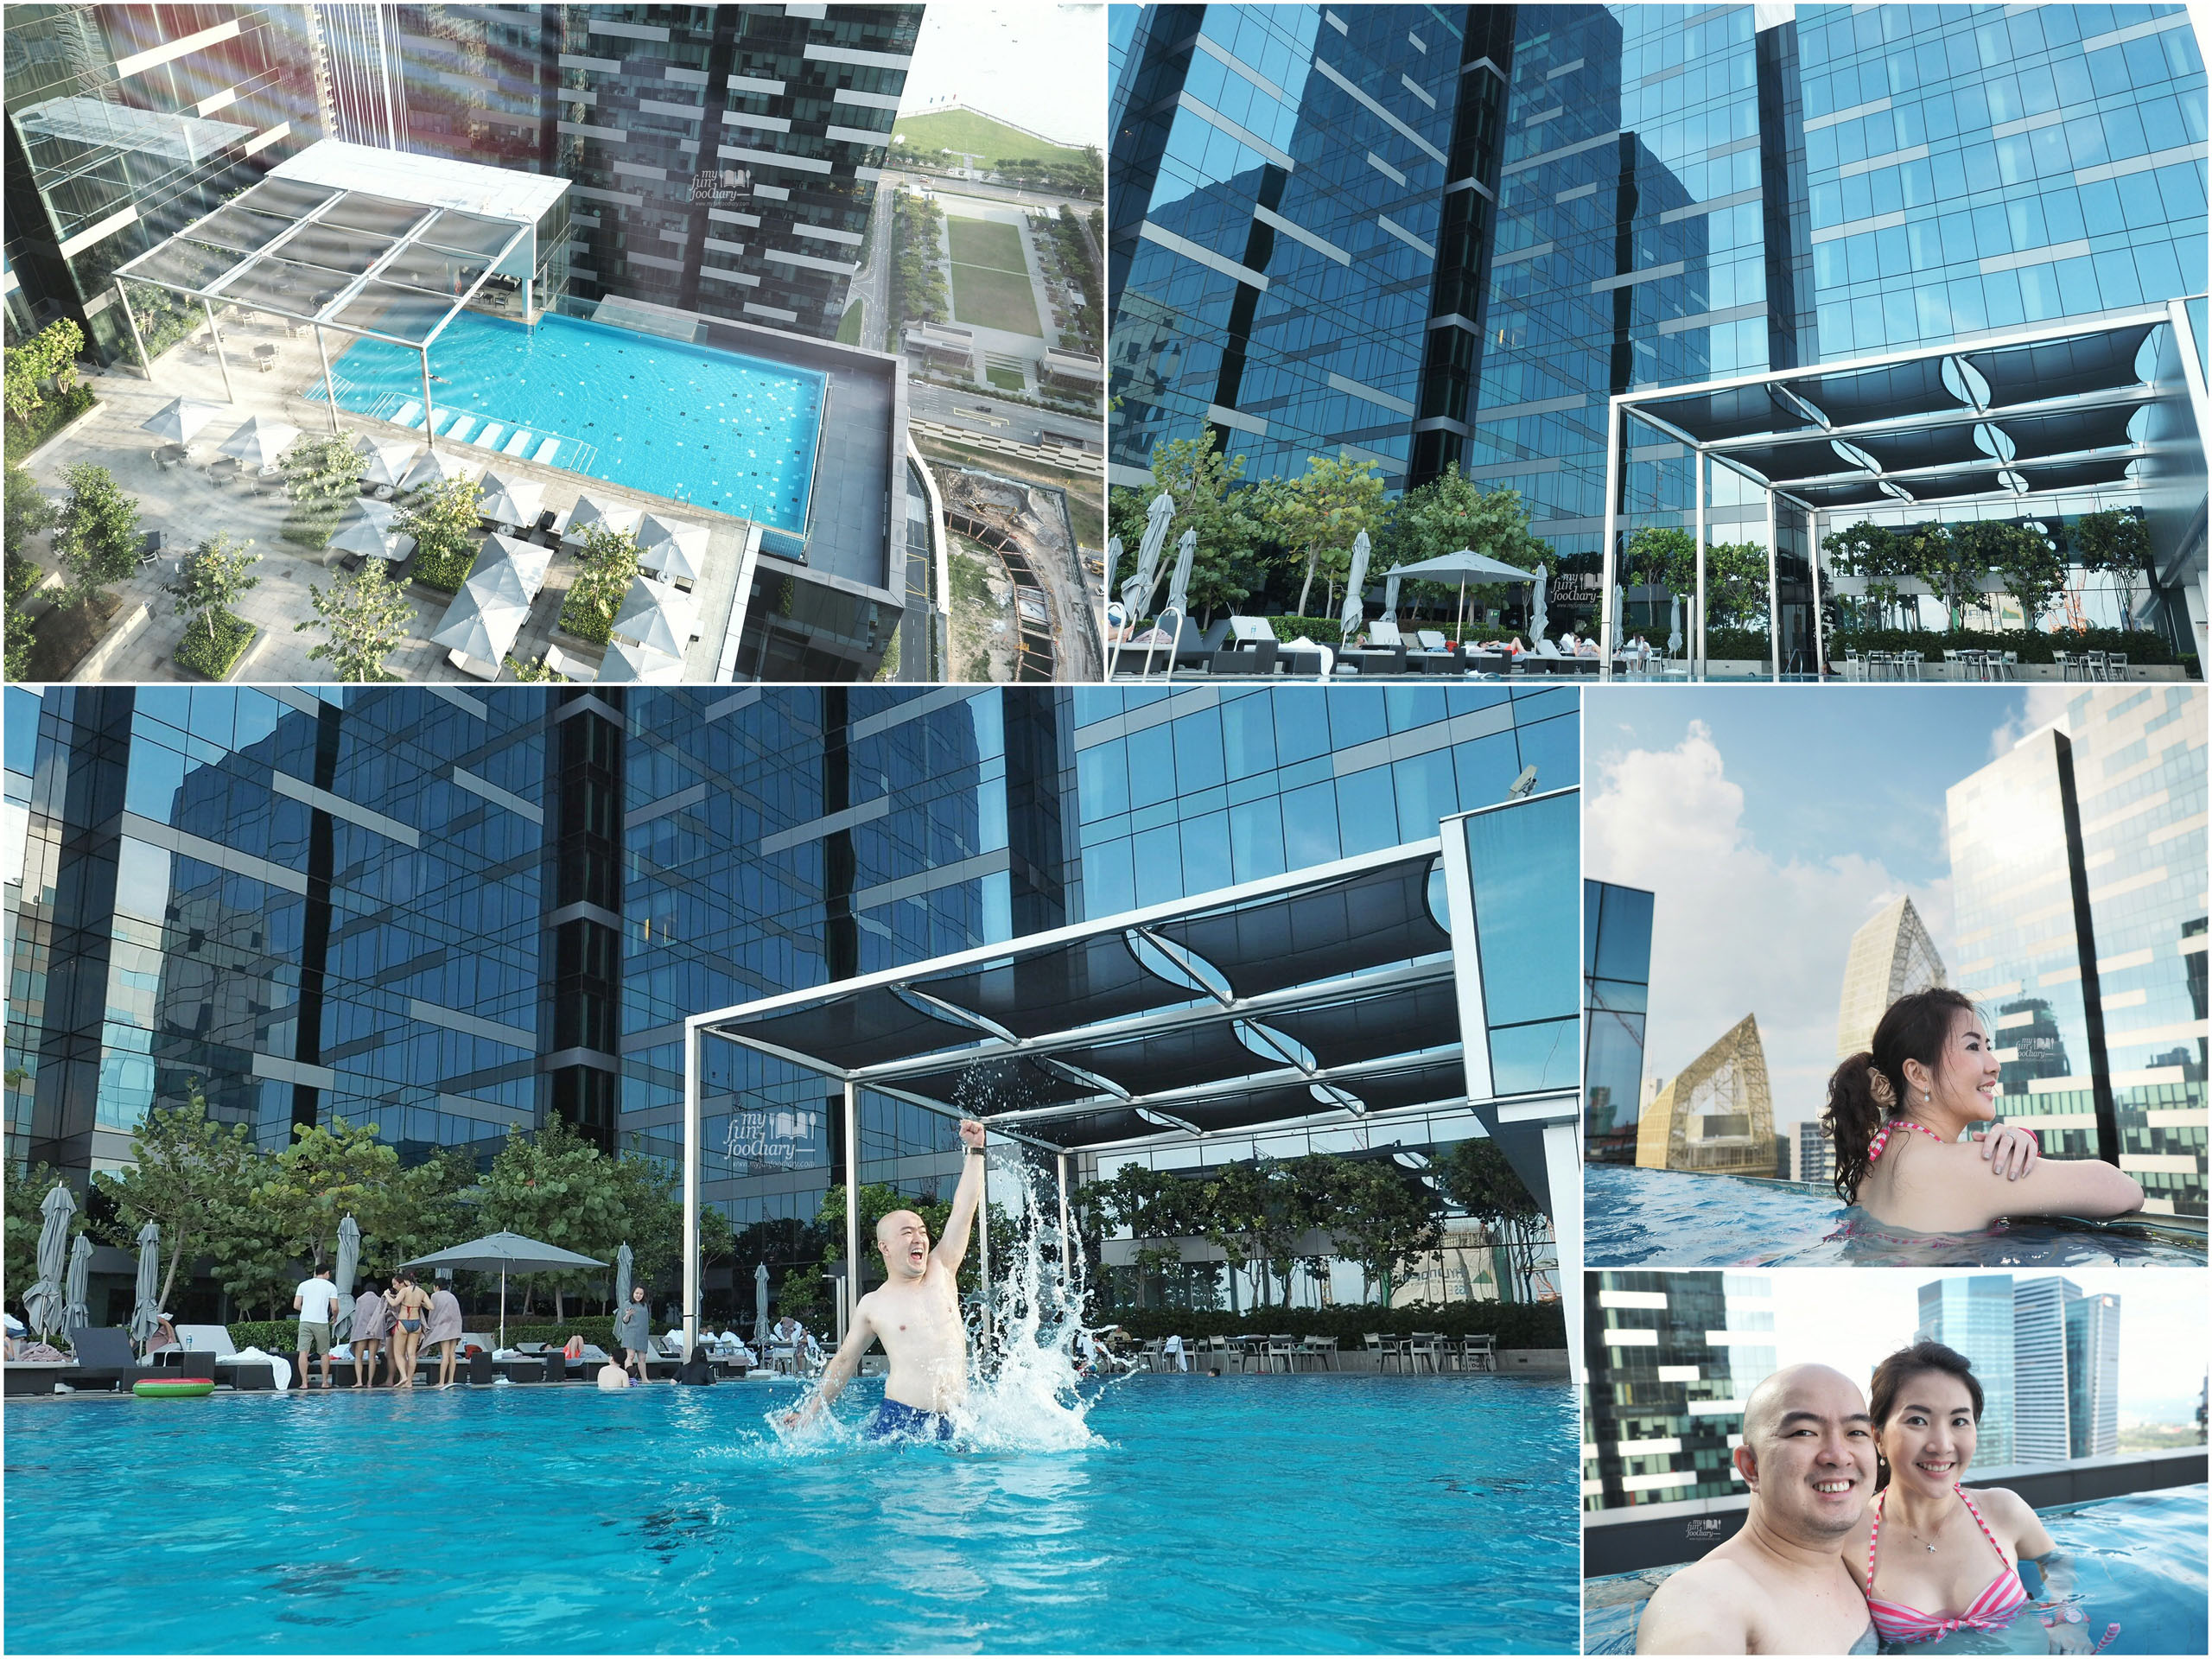 Infinity Pool at Westin Singapore by Myfunfoodiary collage